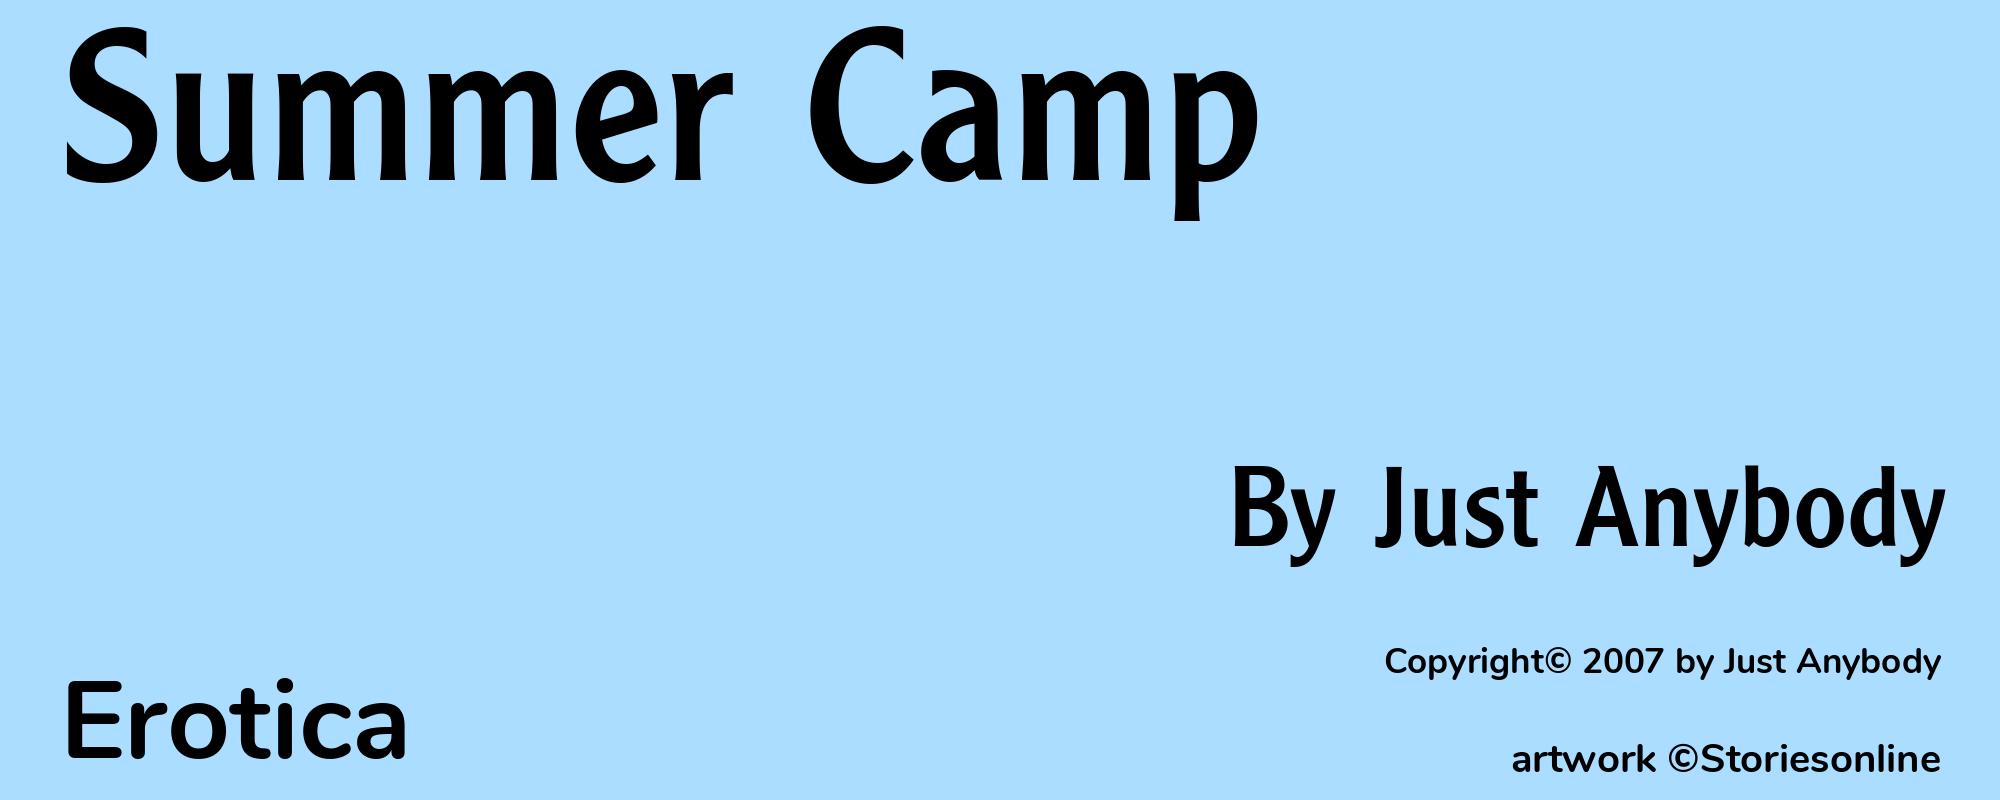 Summer Camp - Cover